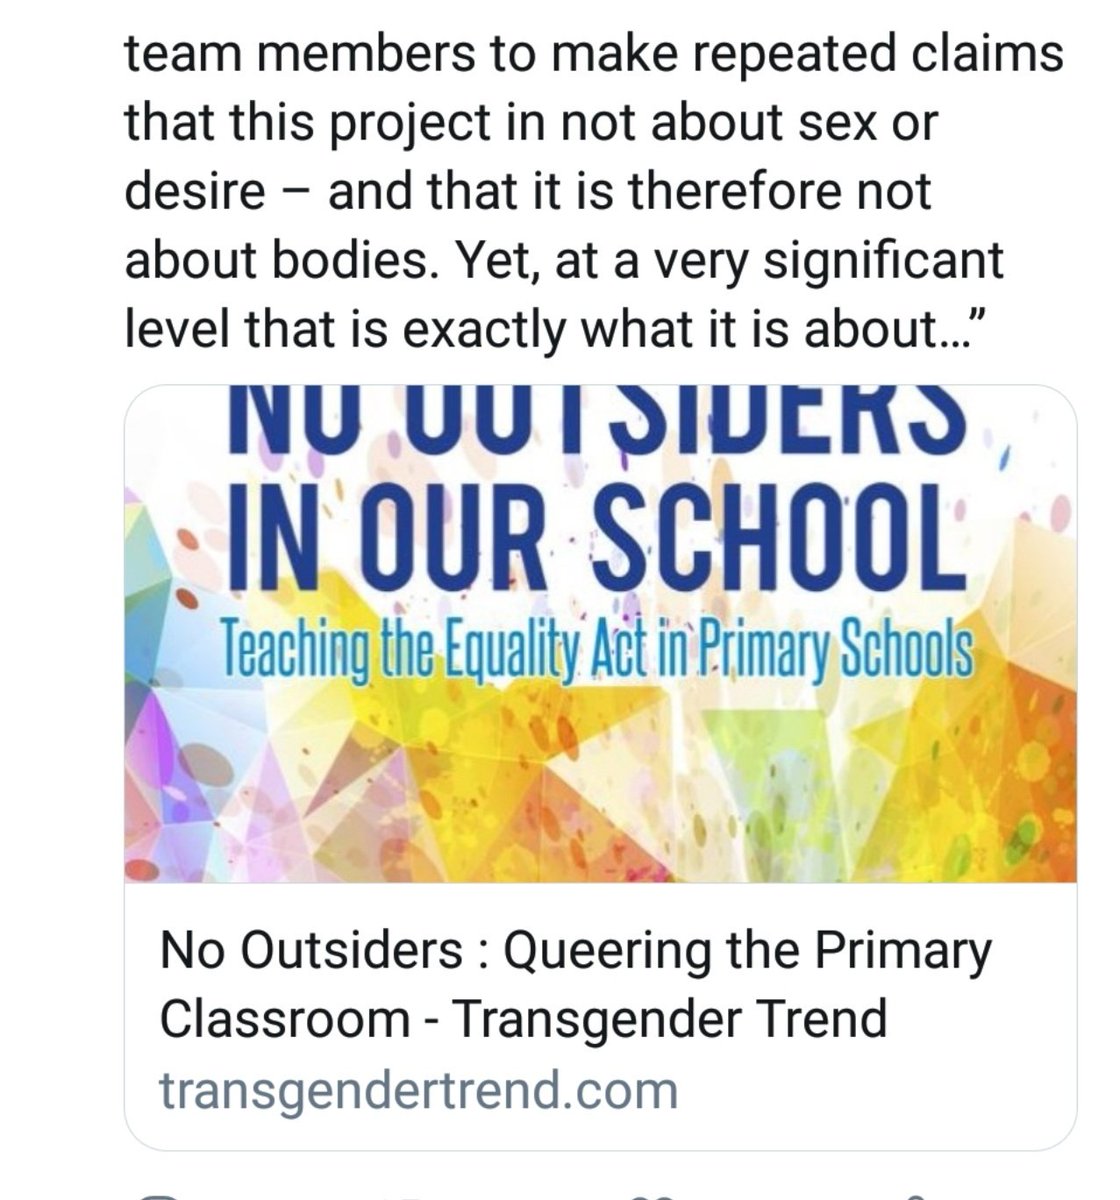 Vilify parents in mediamedia megaphone diplomacy These tactics used for years in the name of equality Christian/Muslim parents raised objections years ago https://www.transgendertrend.com/no-outsiders-queering-primary-classroom/